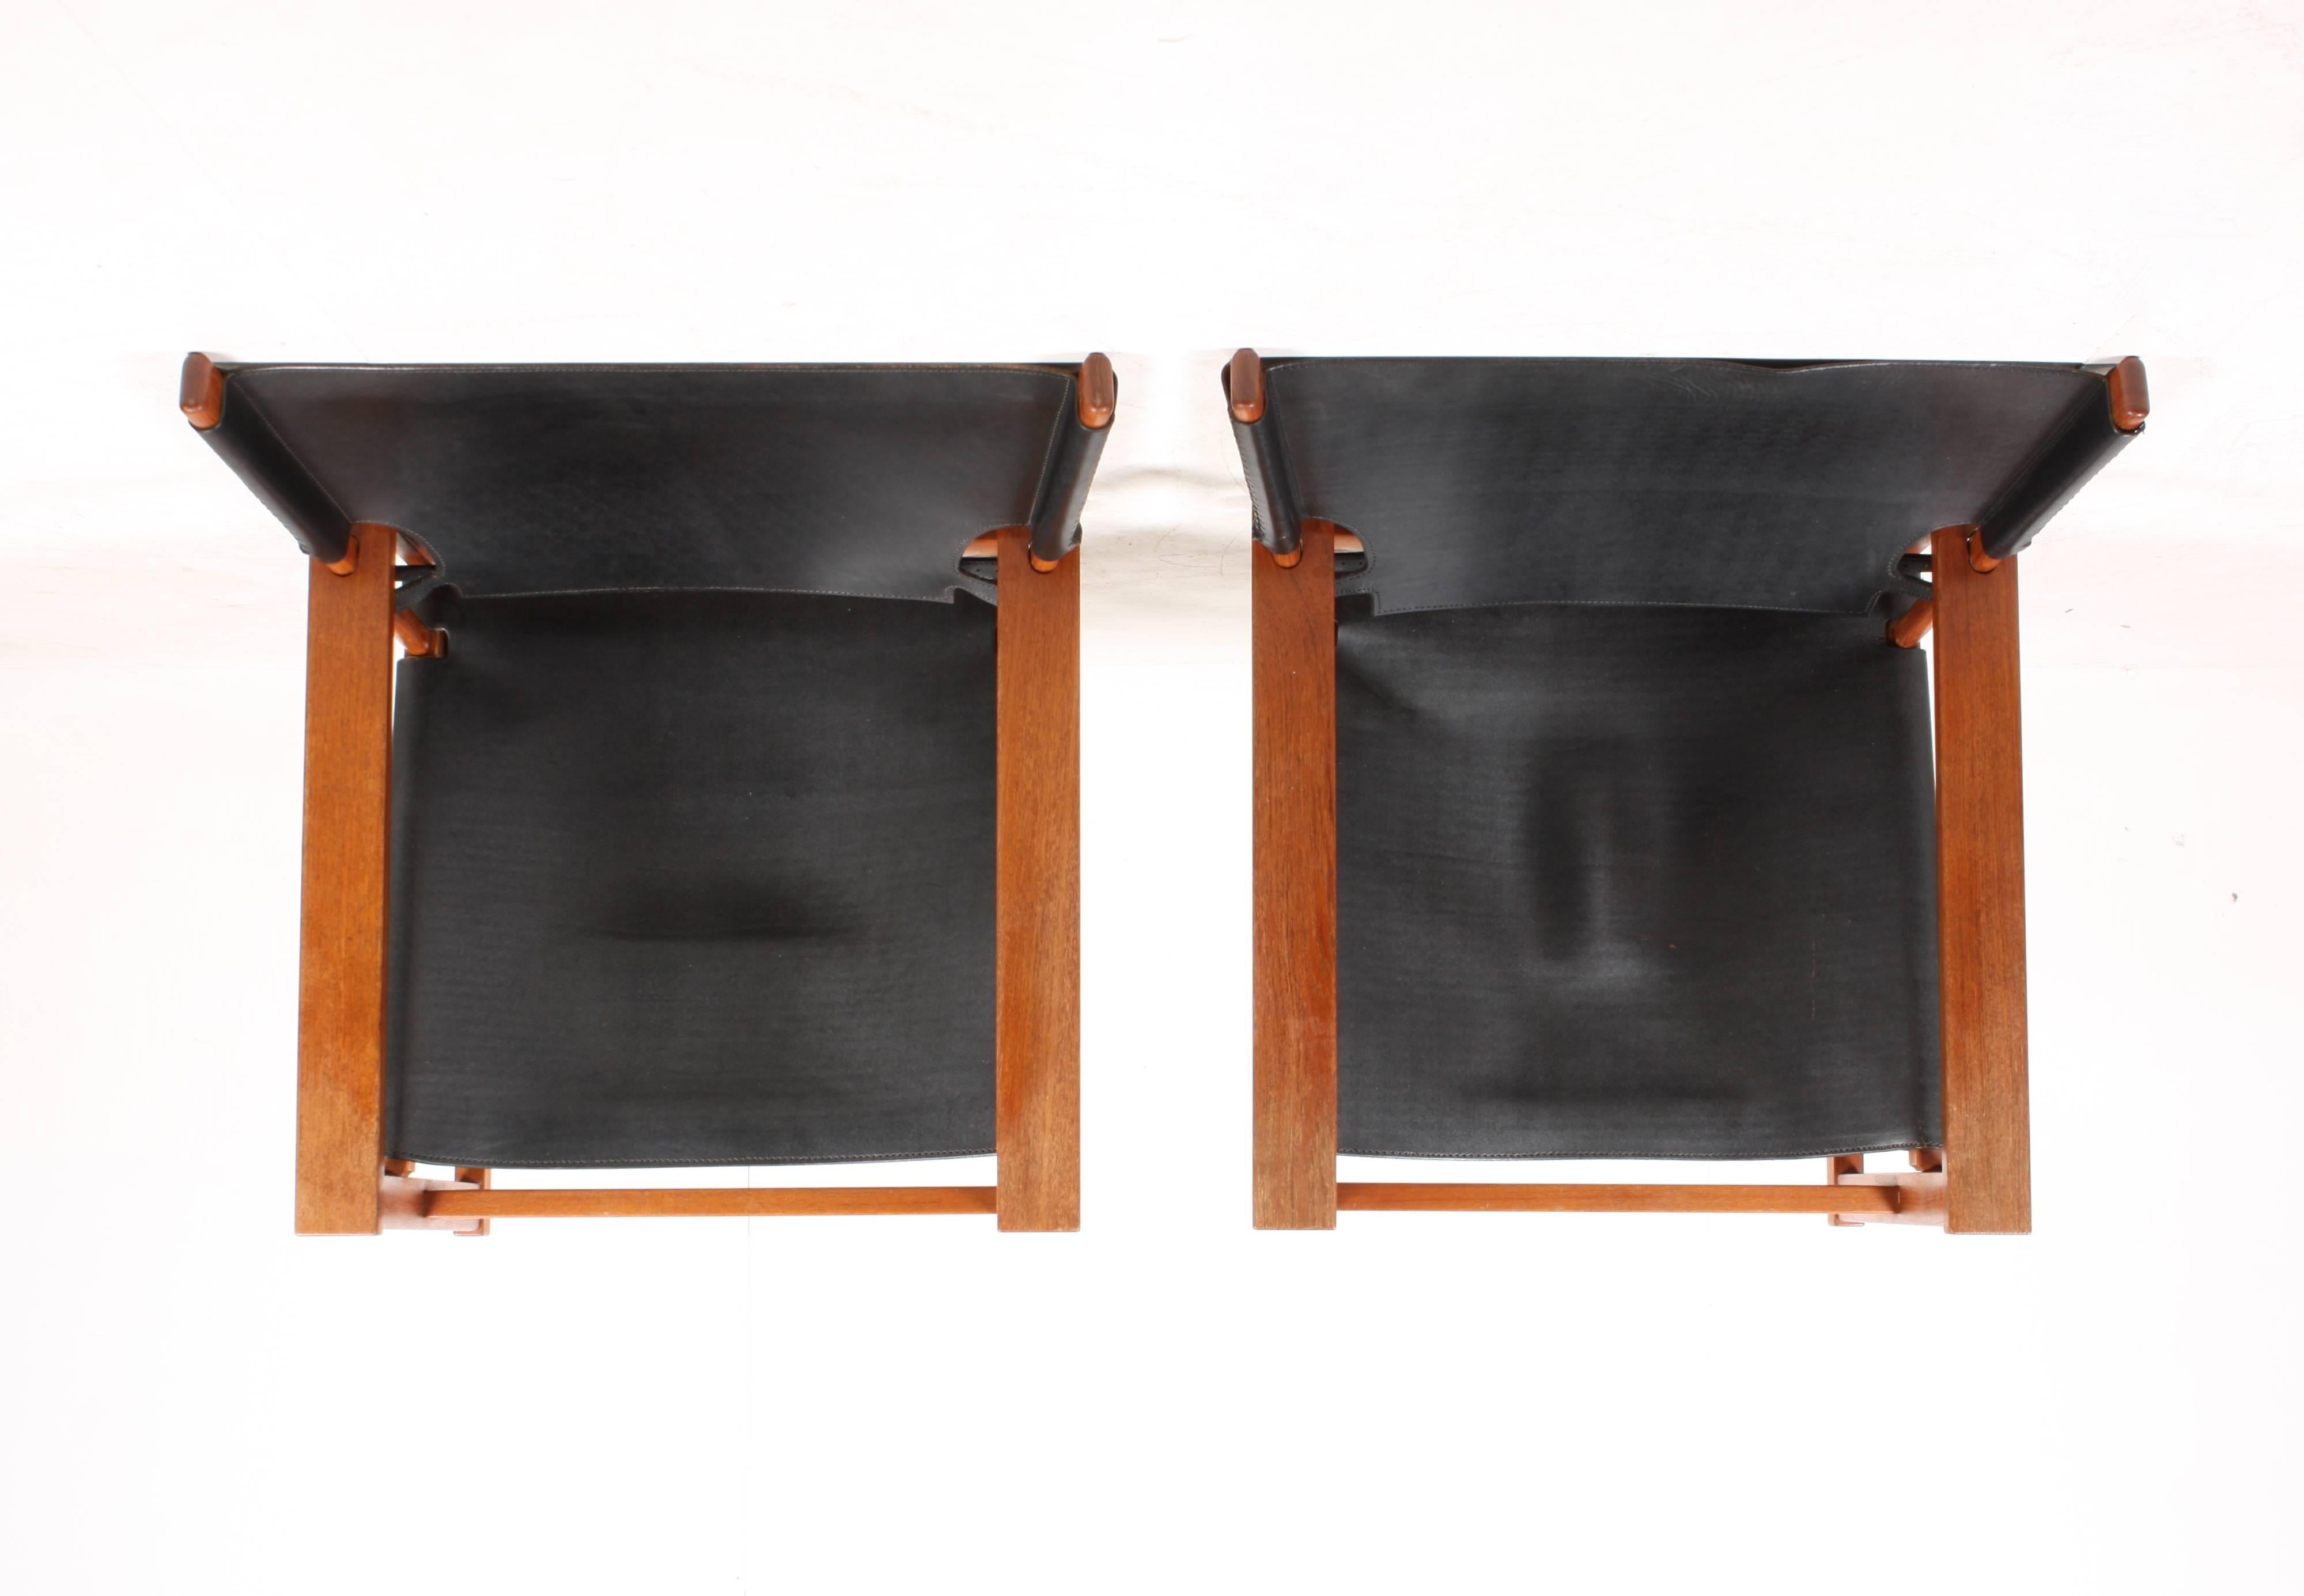 Pair of Midcentury of Lounge Chairs in Leather and Teak Made in Denmark 1